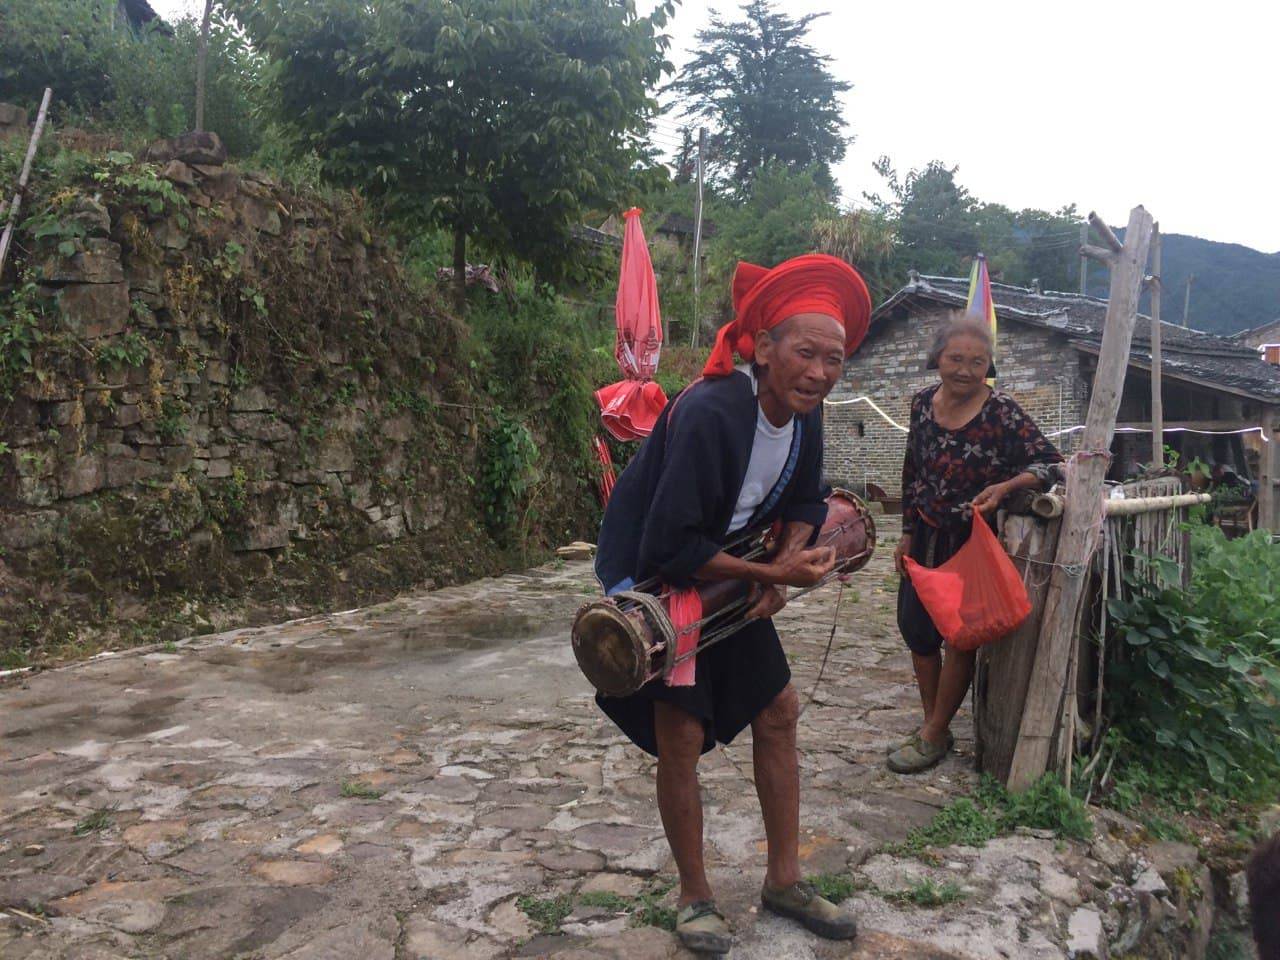 When we were leaving the village, his wife came out of the house and said bye to us. What a cute couple of Yao! Thank you for the dance performance!